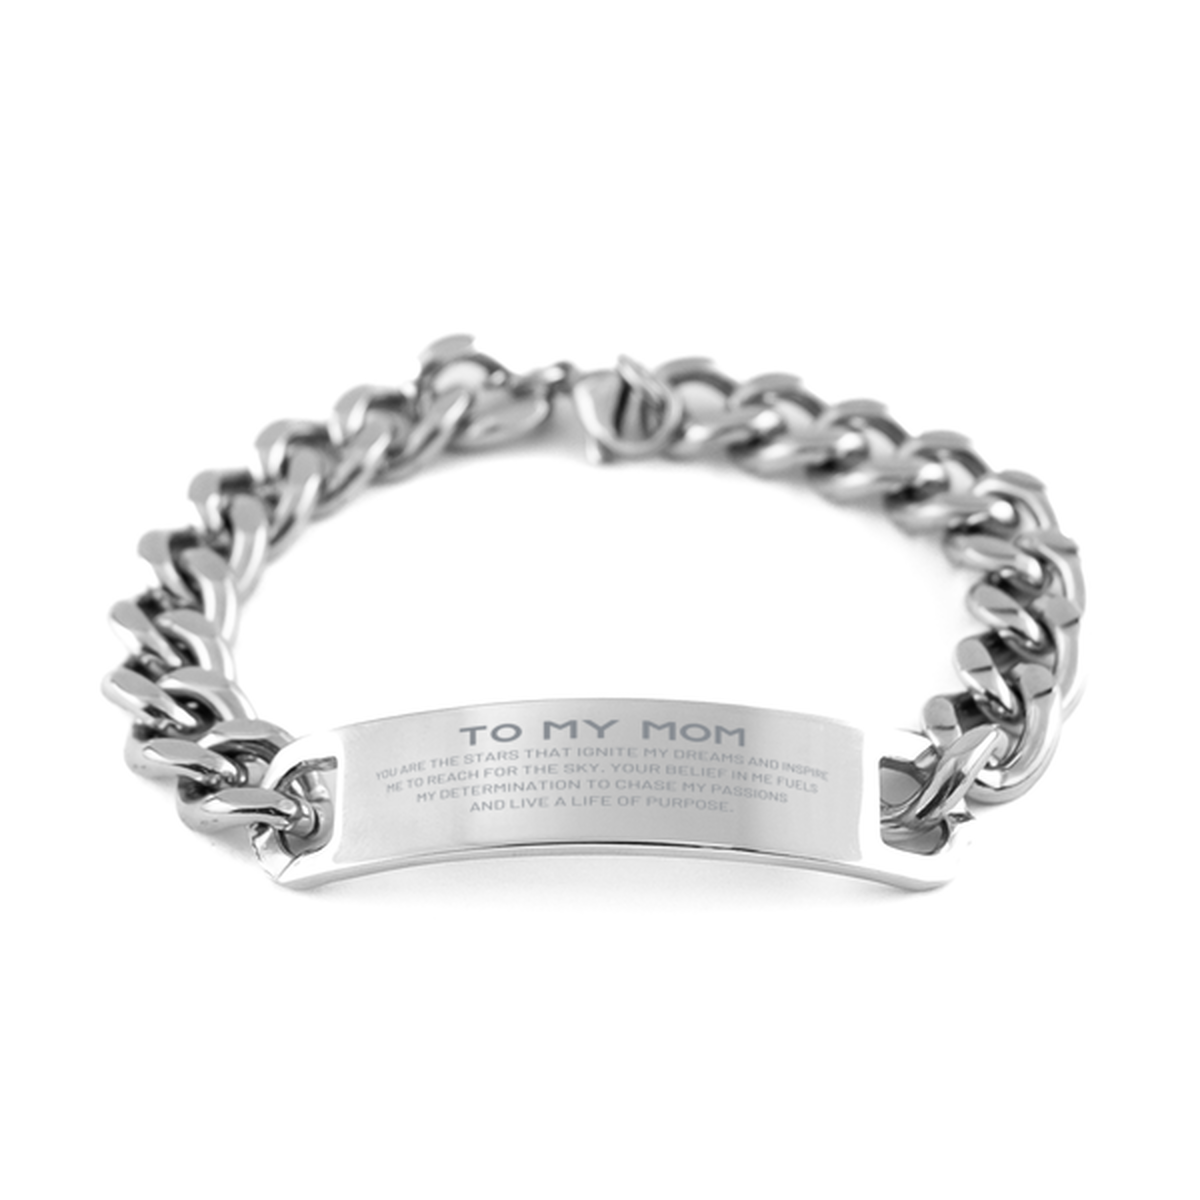 To My Mom Cuban Chain Stainless Steel Bracelet, You are the stars that ignite my dreams and inspire me to reach for the sky, Birthday Unique Gifts For Mom, Thank You Gifts For Mom